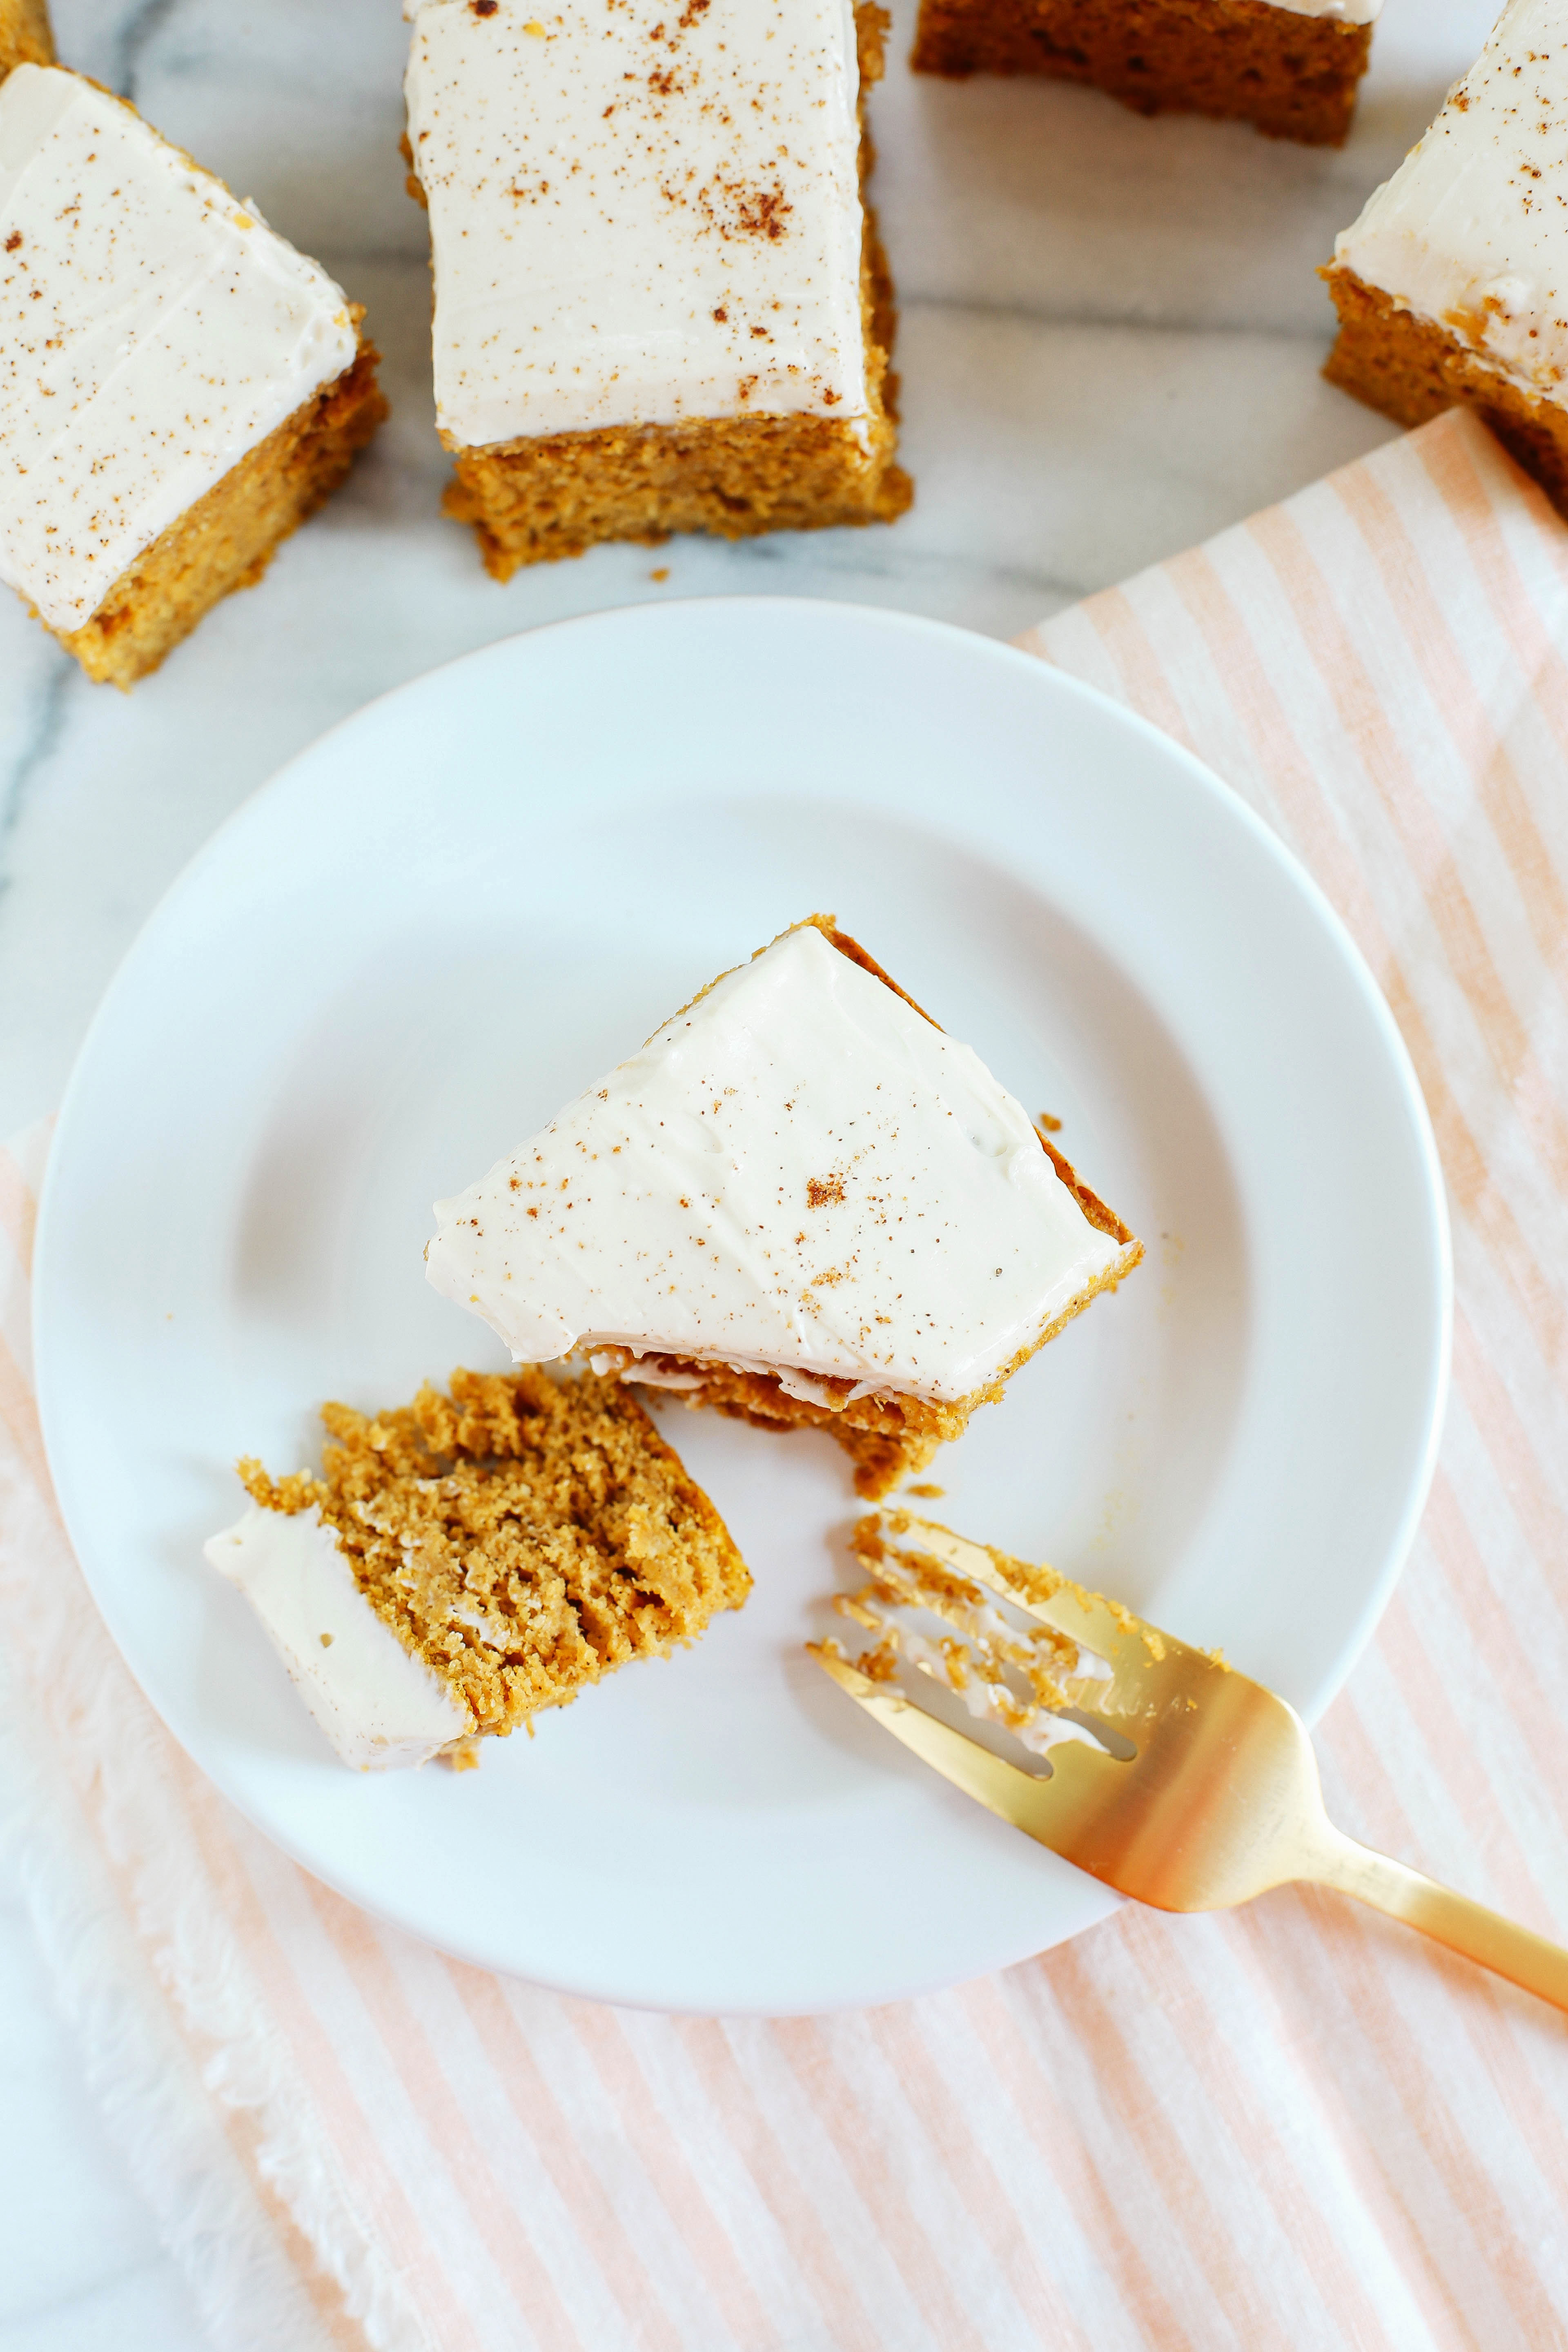 Kick off the fall season with these Healthier Pumpkin Bars with Cream Cheese Frosting that are moist, delicious and taste just like cake, but without any butter or refined sugar!